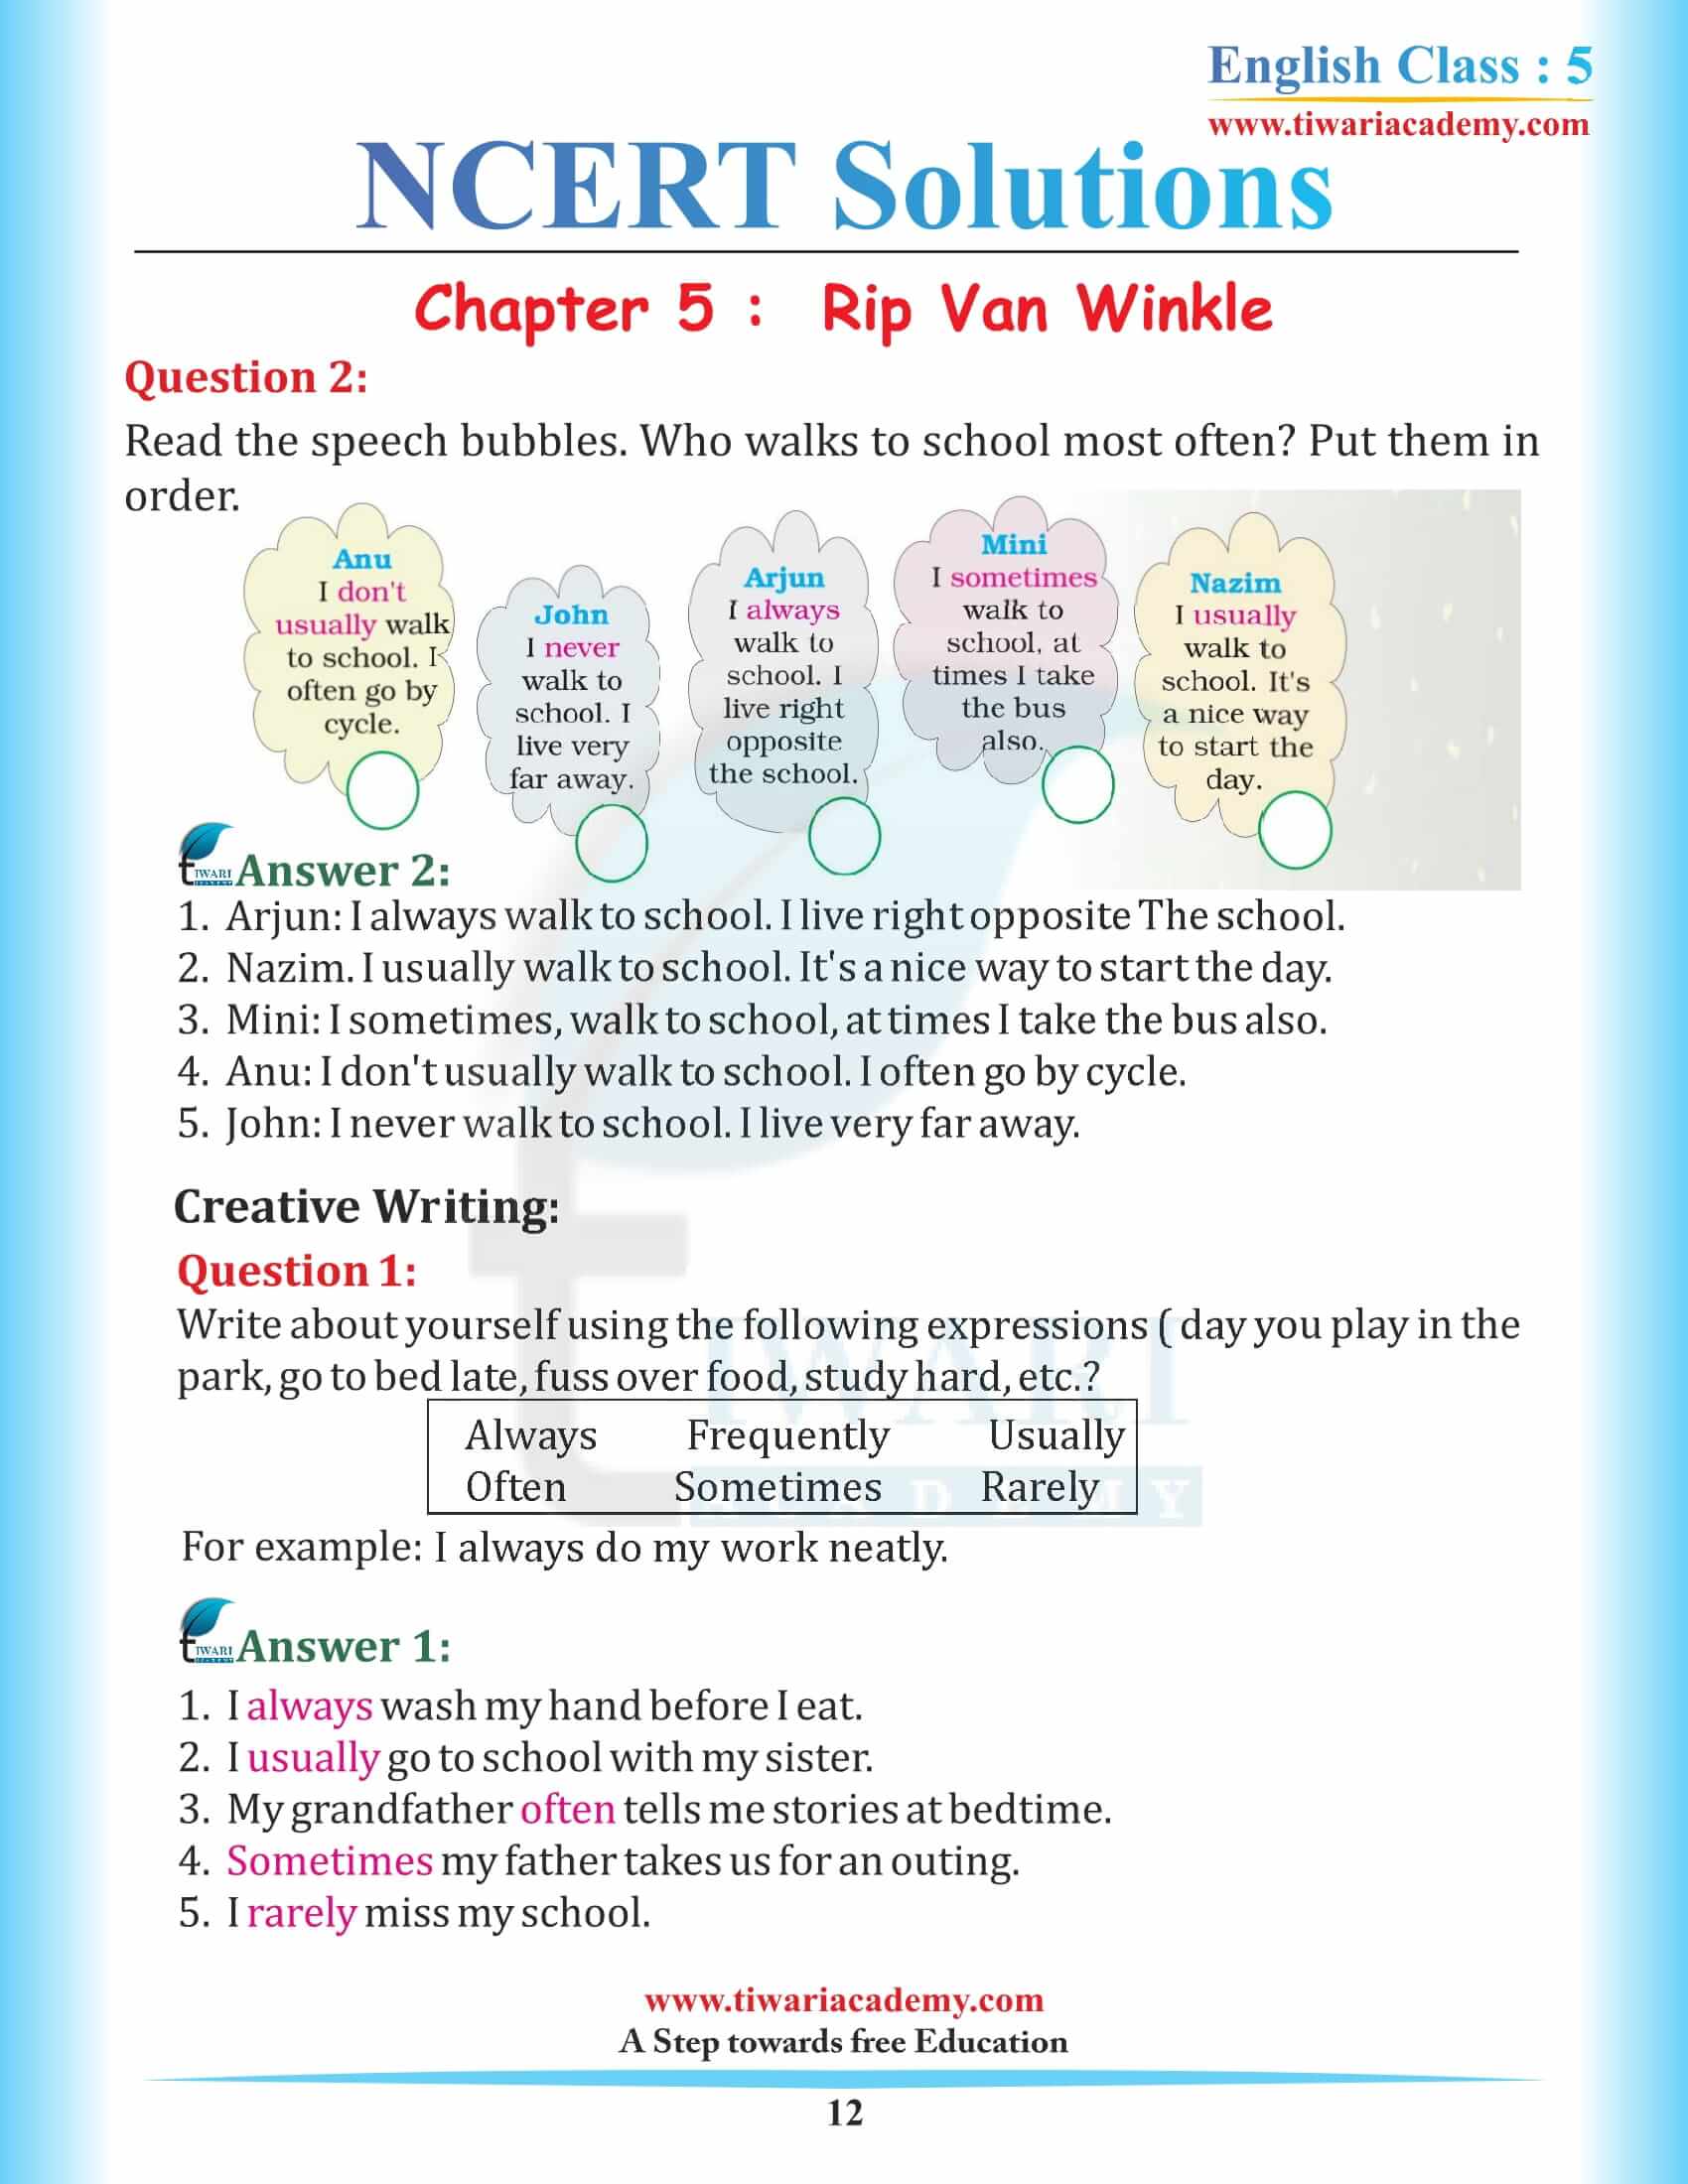 Class 5 English Chapter 5 Rip Van Winkle all question answers